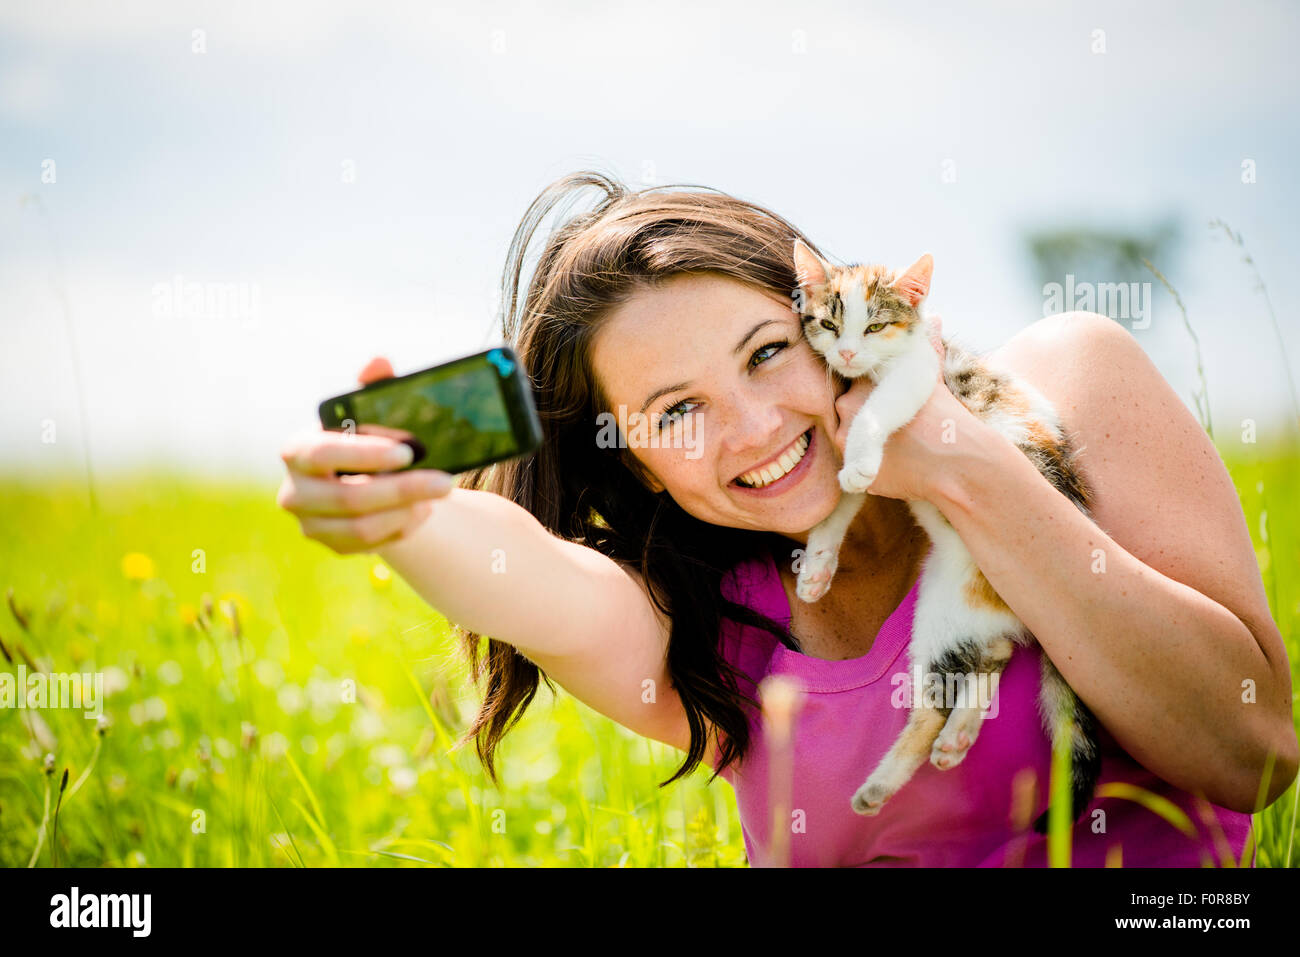 Woman taking photo with mobile phone camera of herself and her cat - outdoor in nature Stock Photo